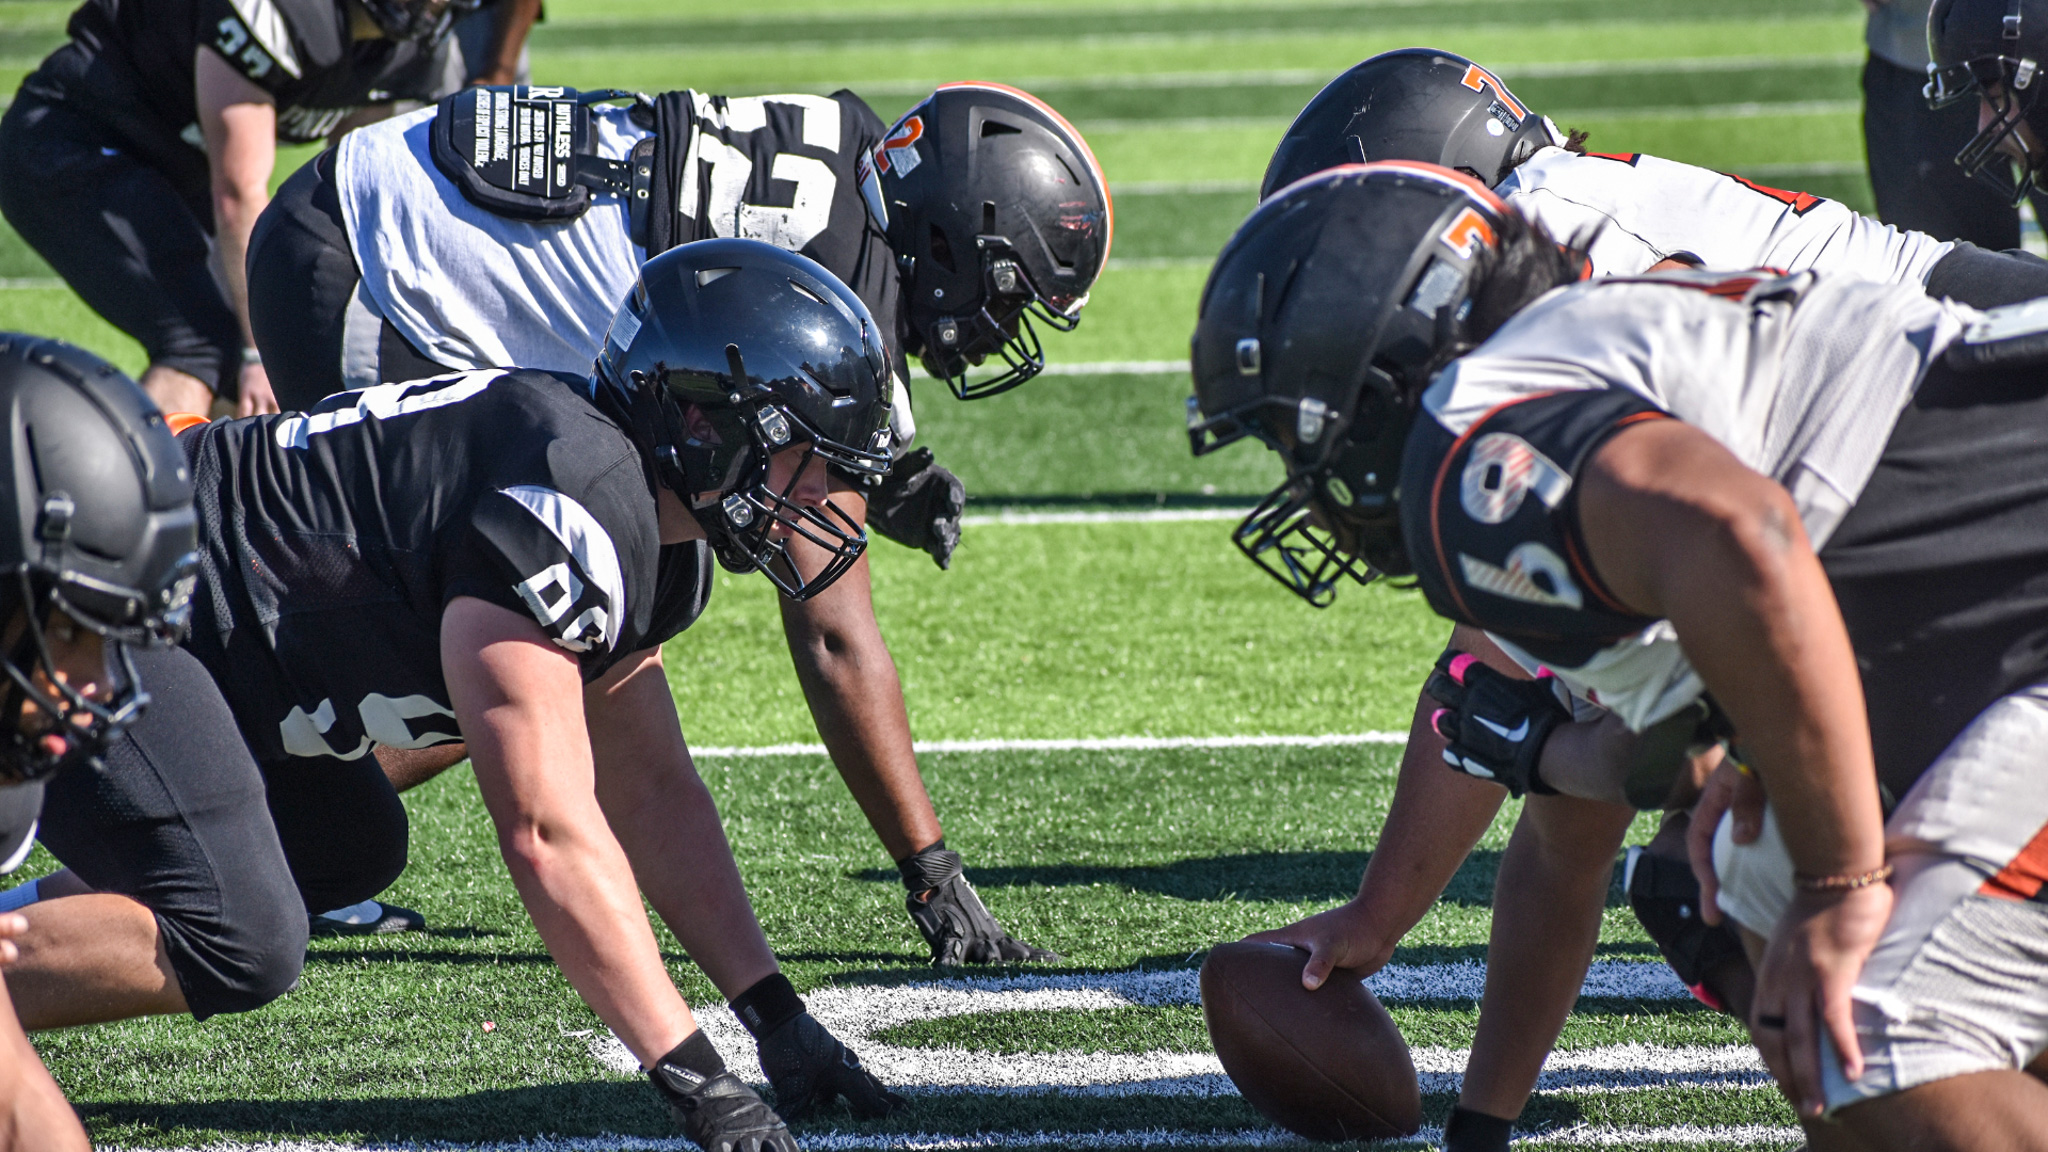 Union football to hold spring scrimmage on April 27